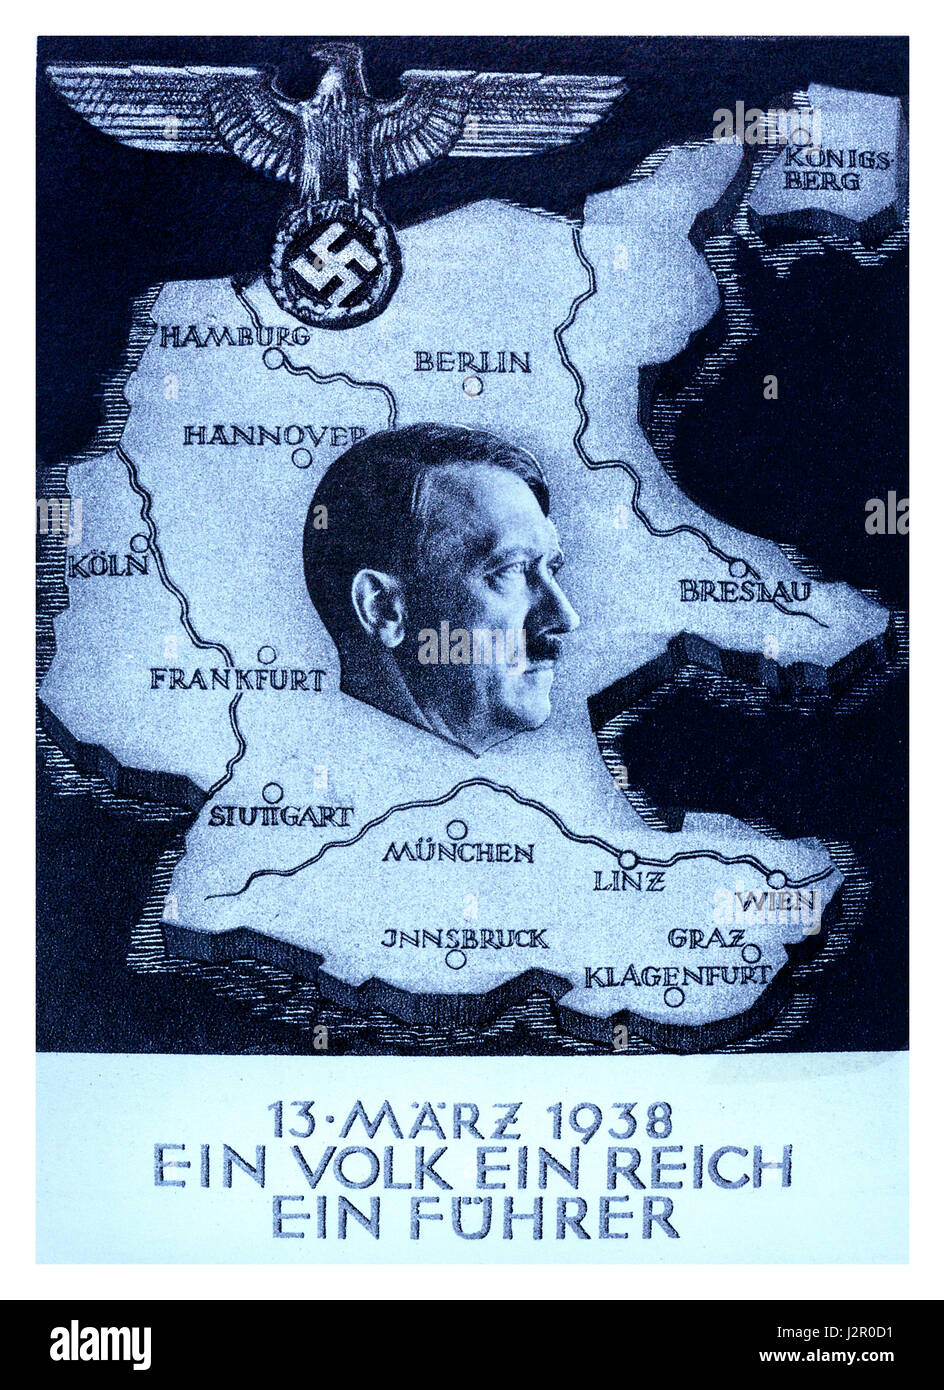 1930's Propaganda 'Anschluss' poster by Adolf Hitler 'One People..One Reich..One Führer'  Austria was annexed into Nazi Germany on 12th March 1938 Stock Photo